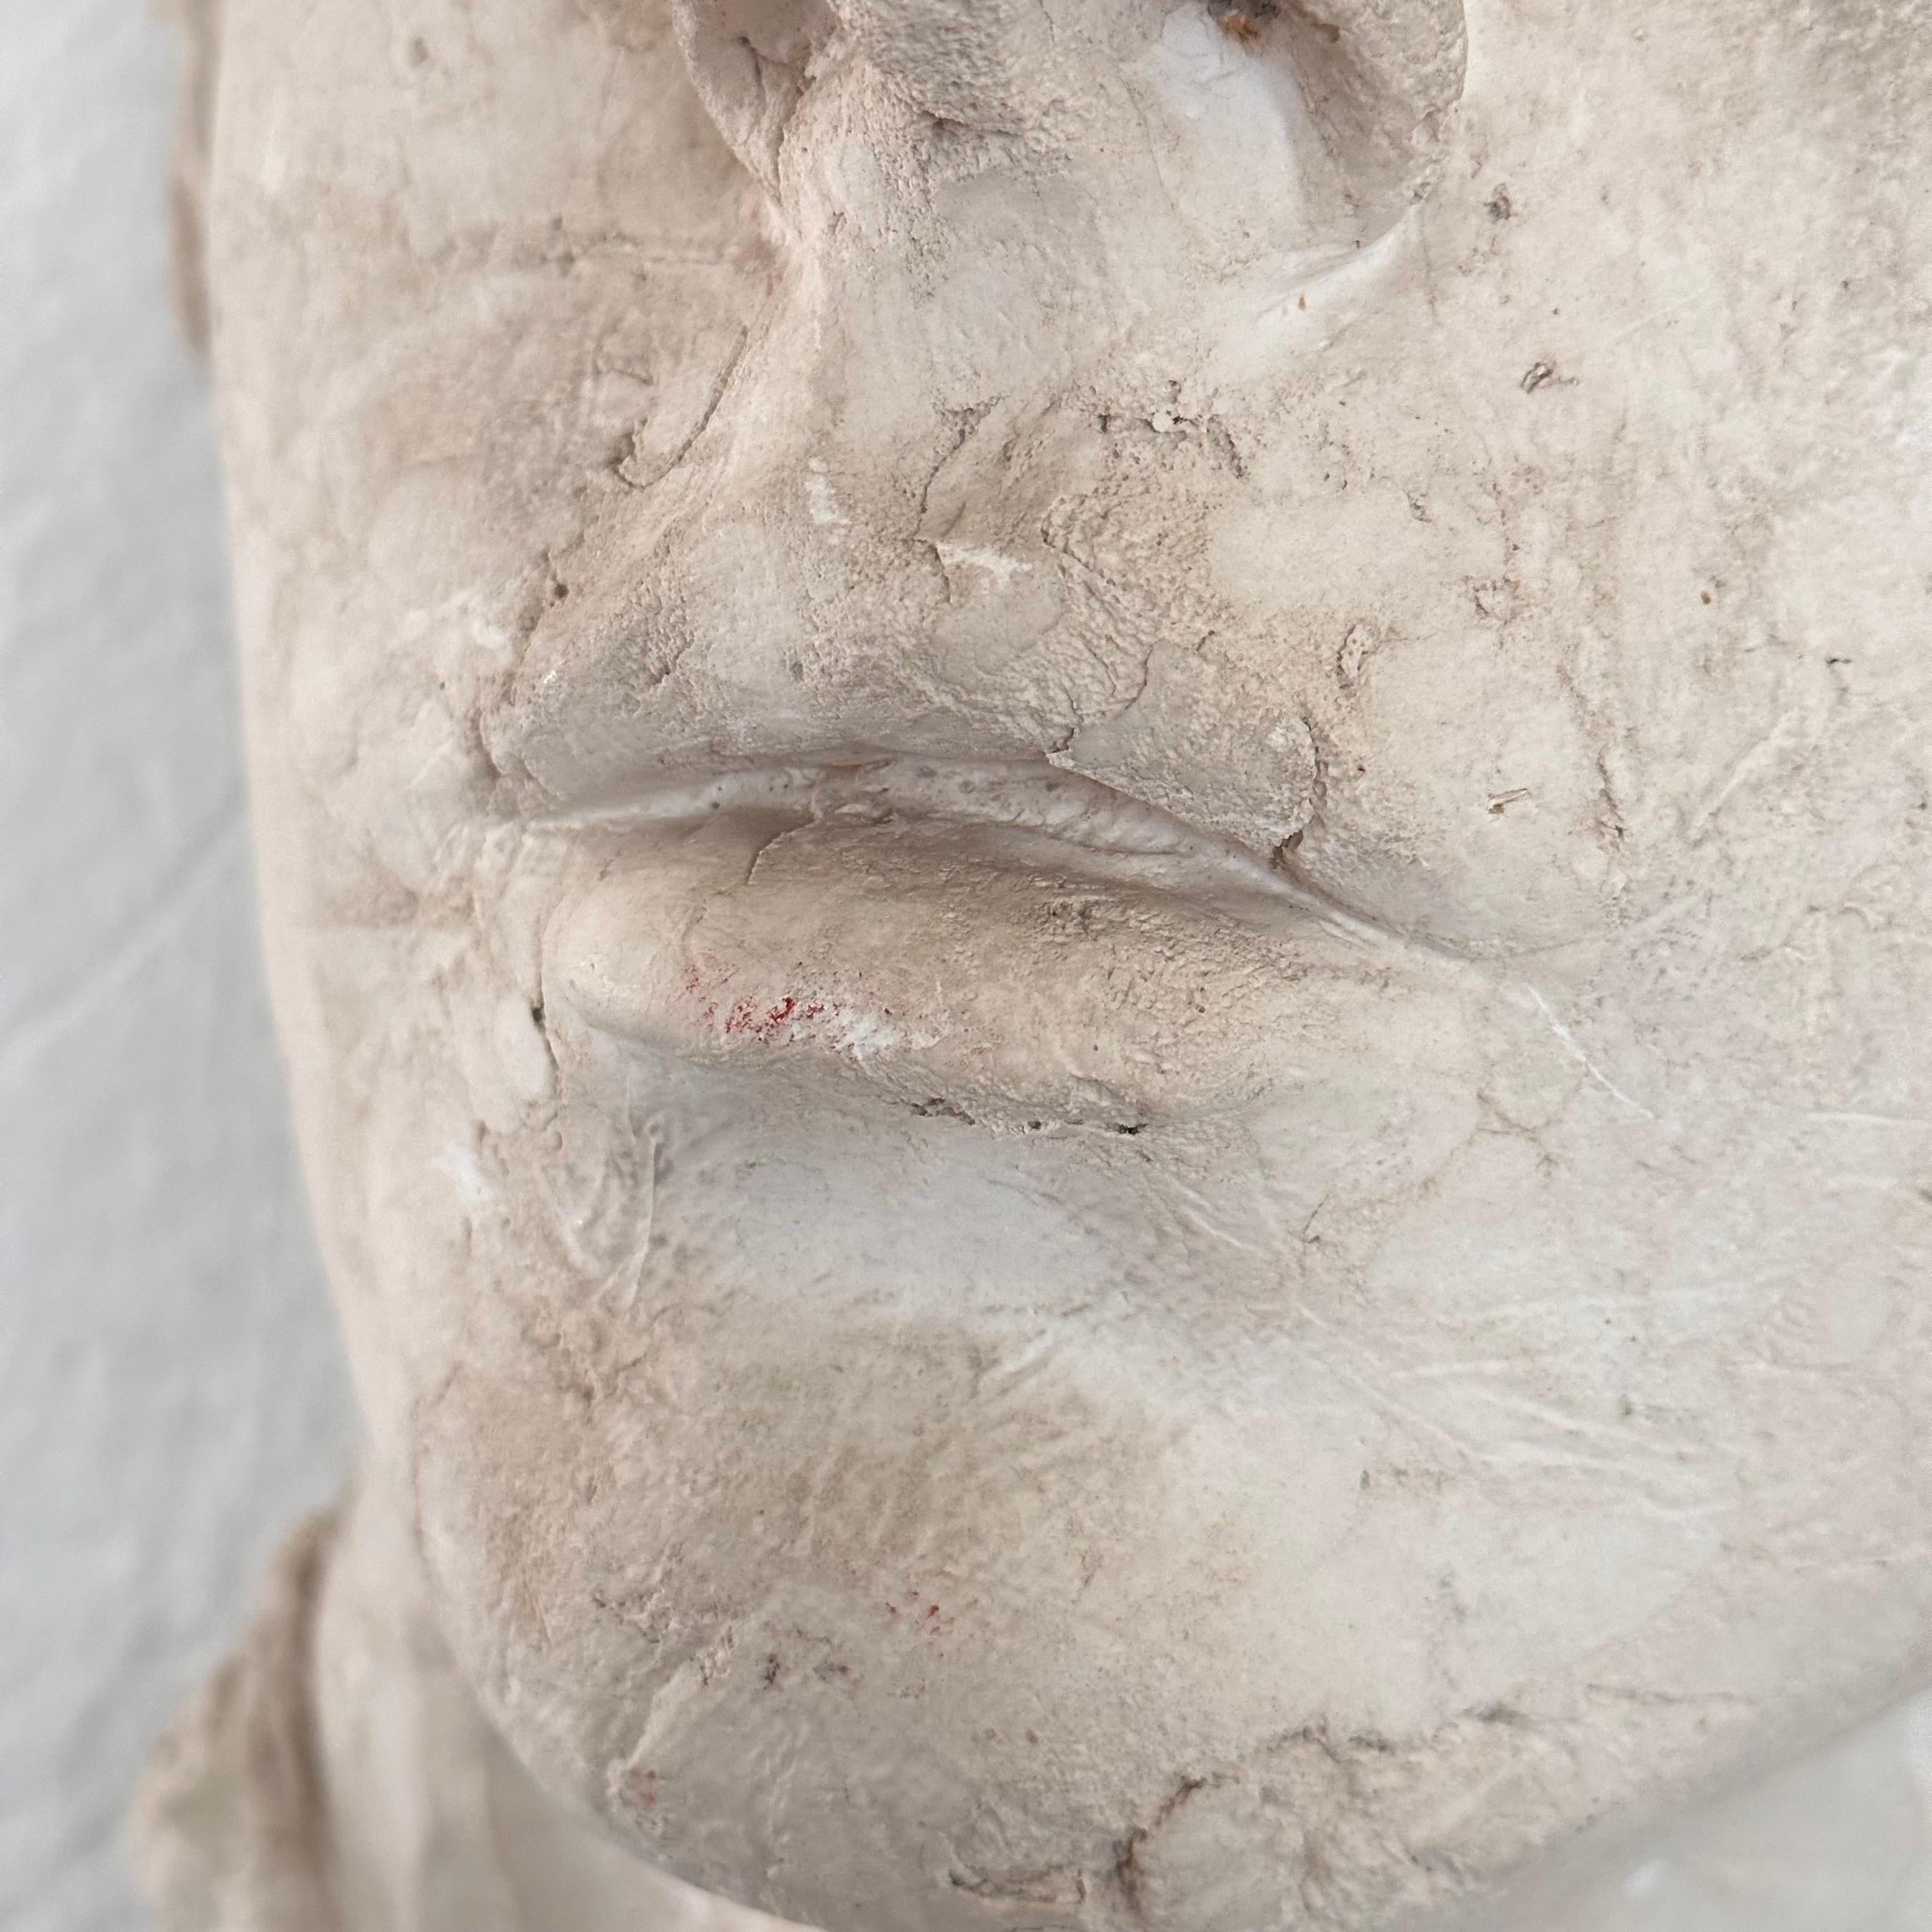 Stunning Decorative Roman Gypsum Face, 1970s Reproduction For Sale 3